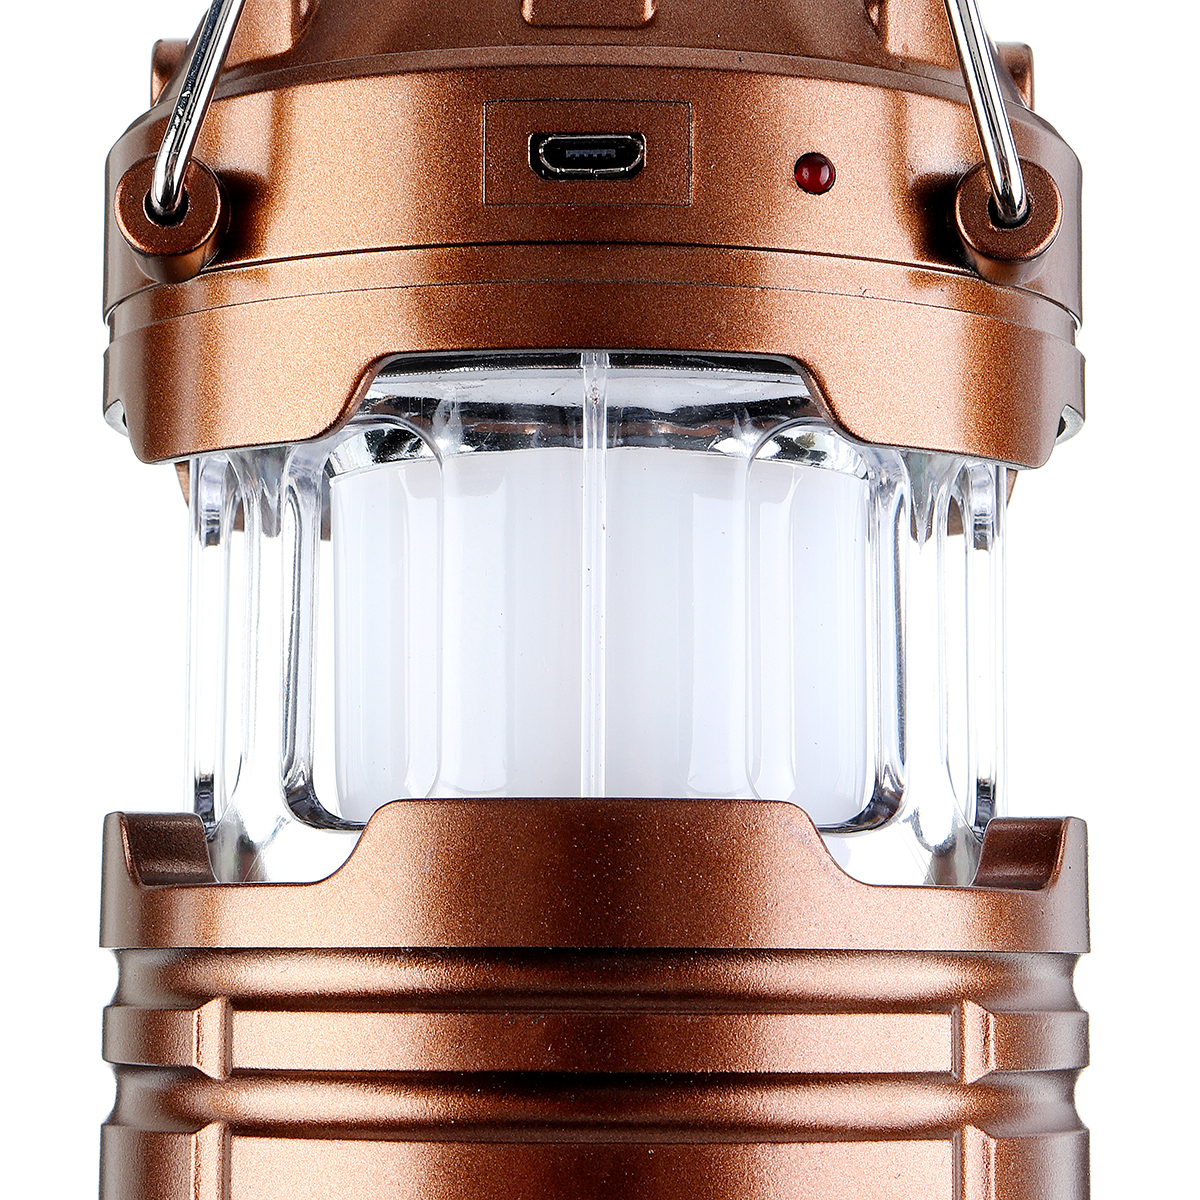 DC-5V-Outdoor-LED-Camping-Lantern-Tent-Ultra-Bright-Collapsible-Mosquito-Insect-Killer-Lamp-Light-1348124-10